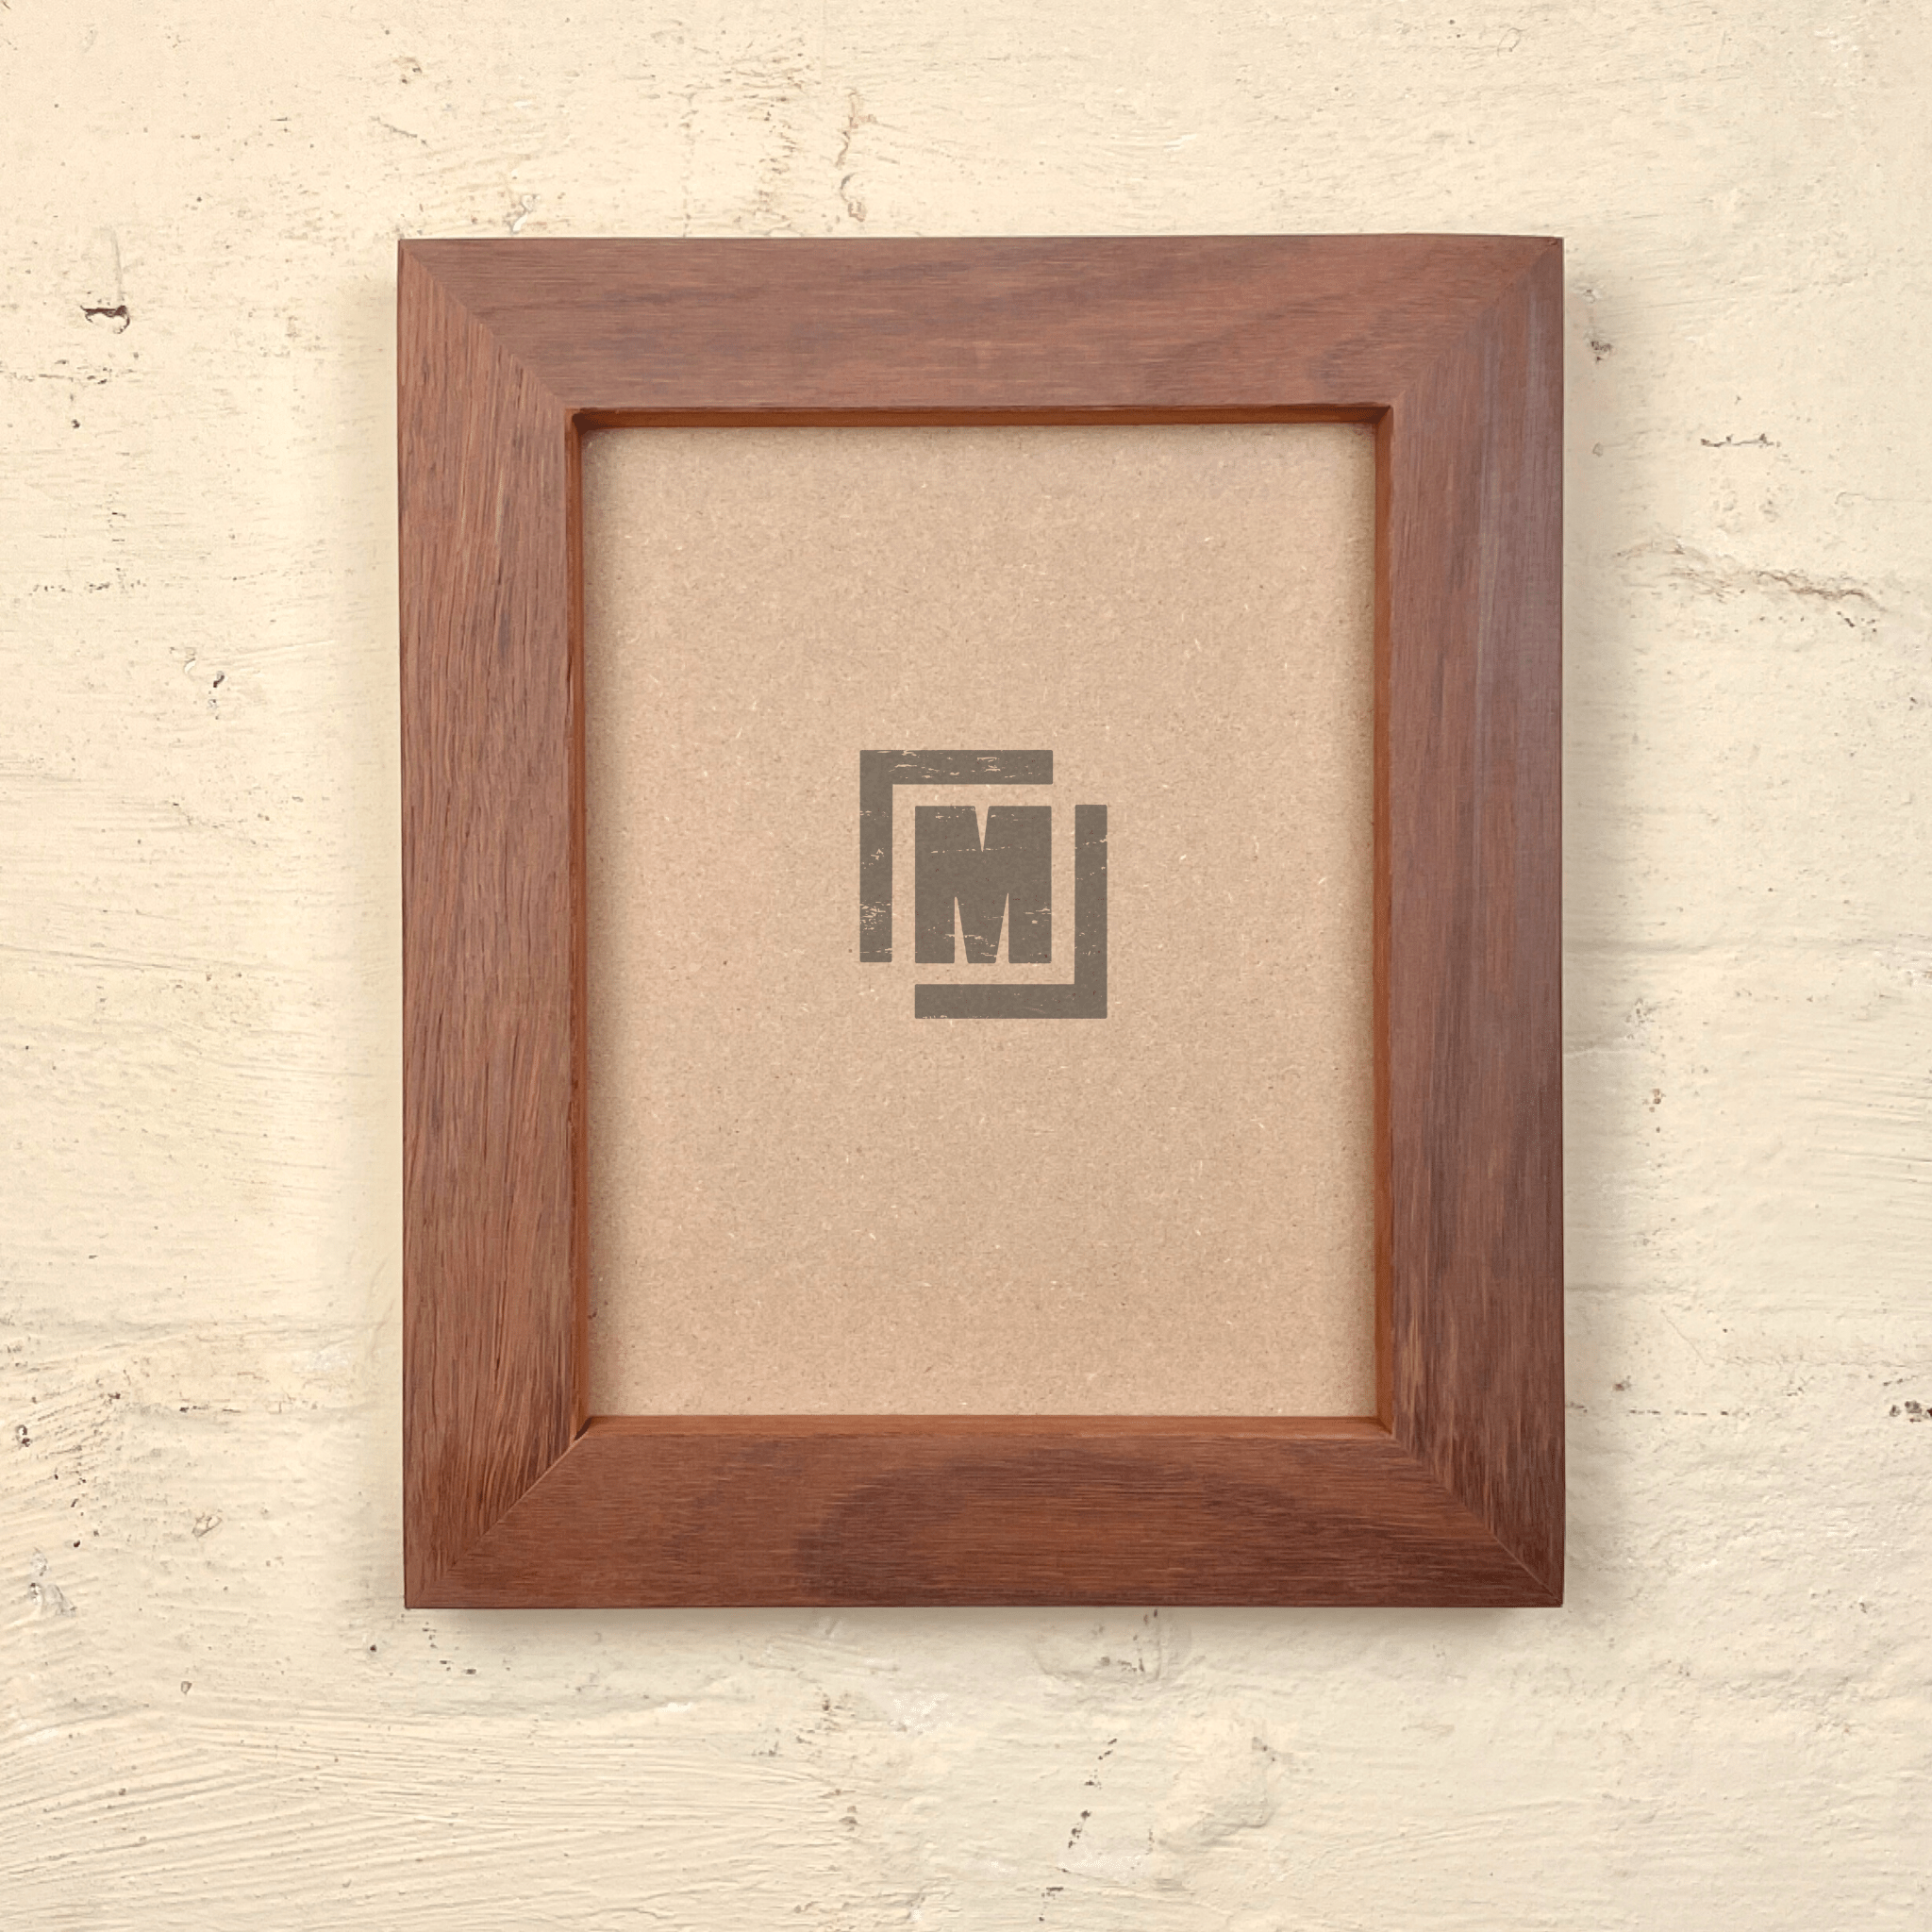 8" x 10" picture frame, Australian made form native aussie red gum. Strong and durable timber. Eco homeware by Mulbury.